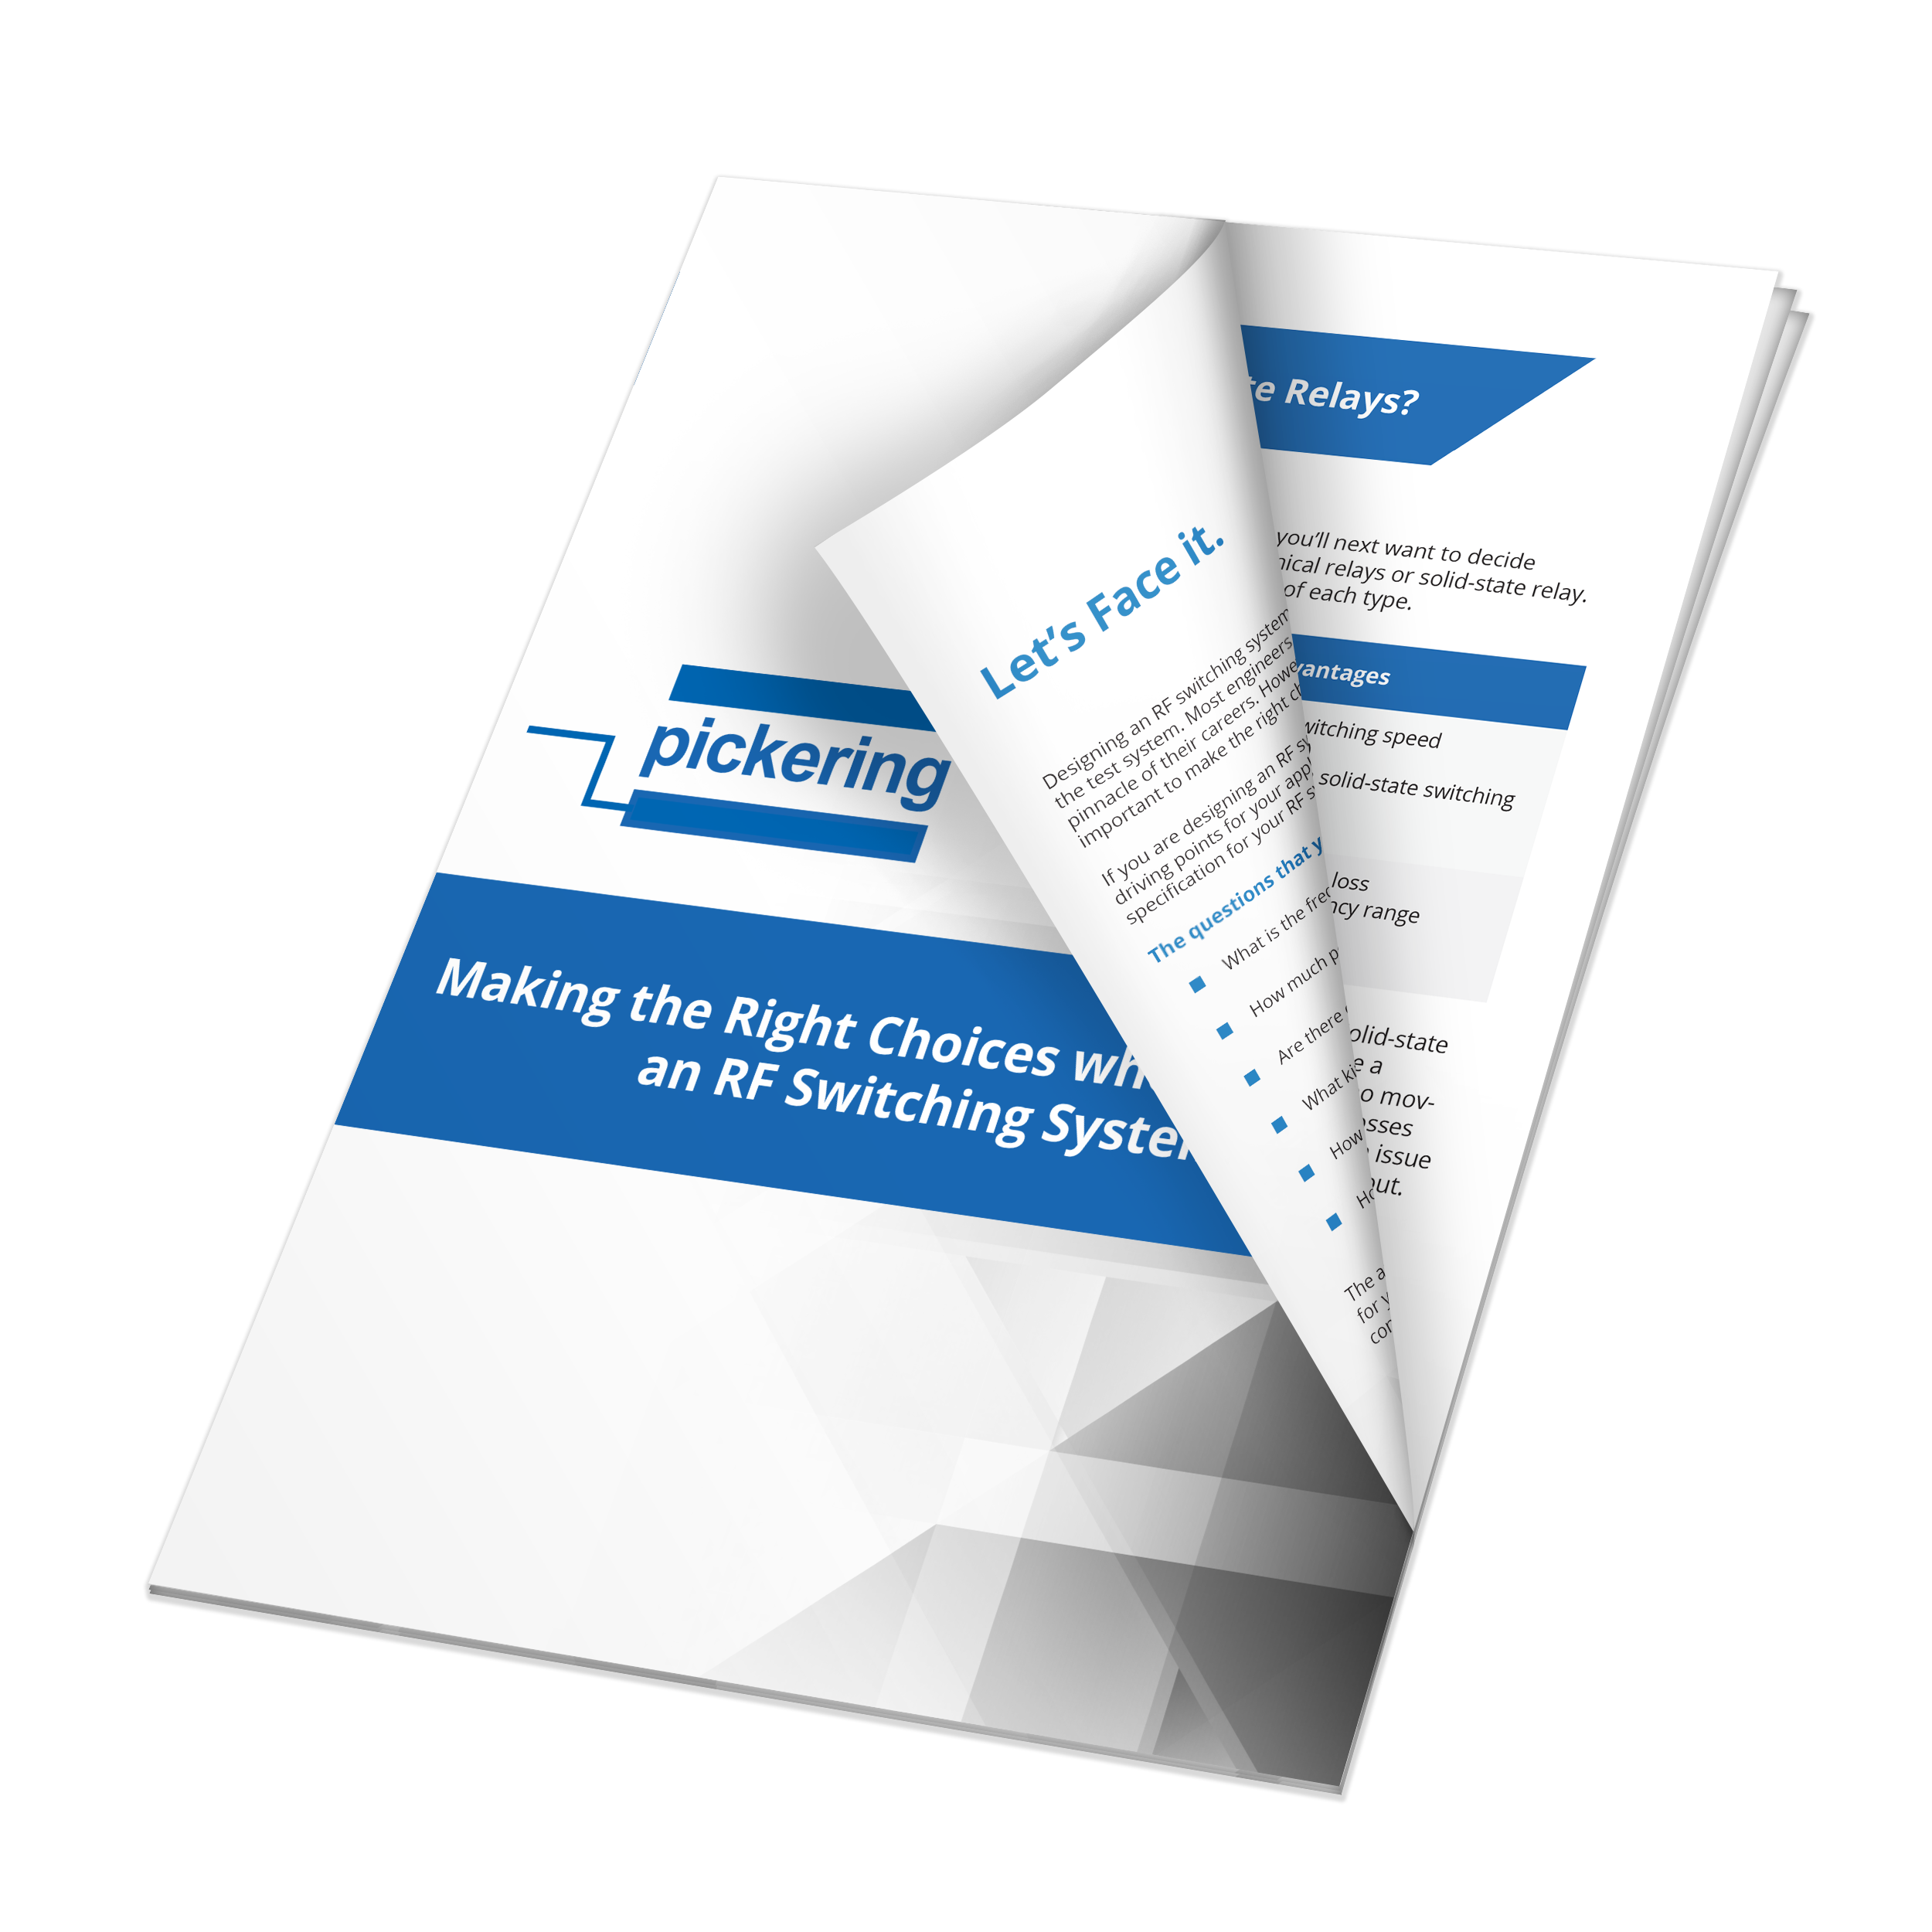 making-the-right-choices-when-specifying-an-rf-switching-system-whitepaper-mockup